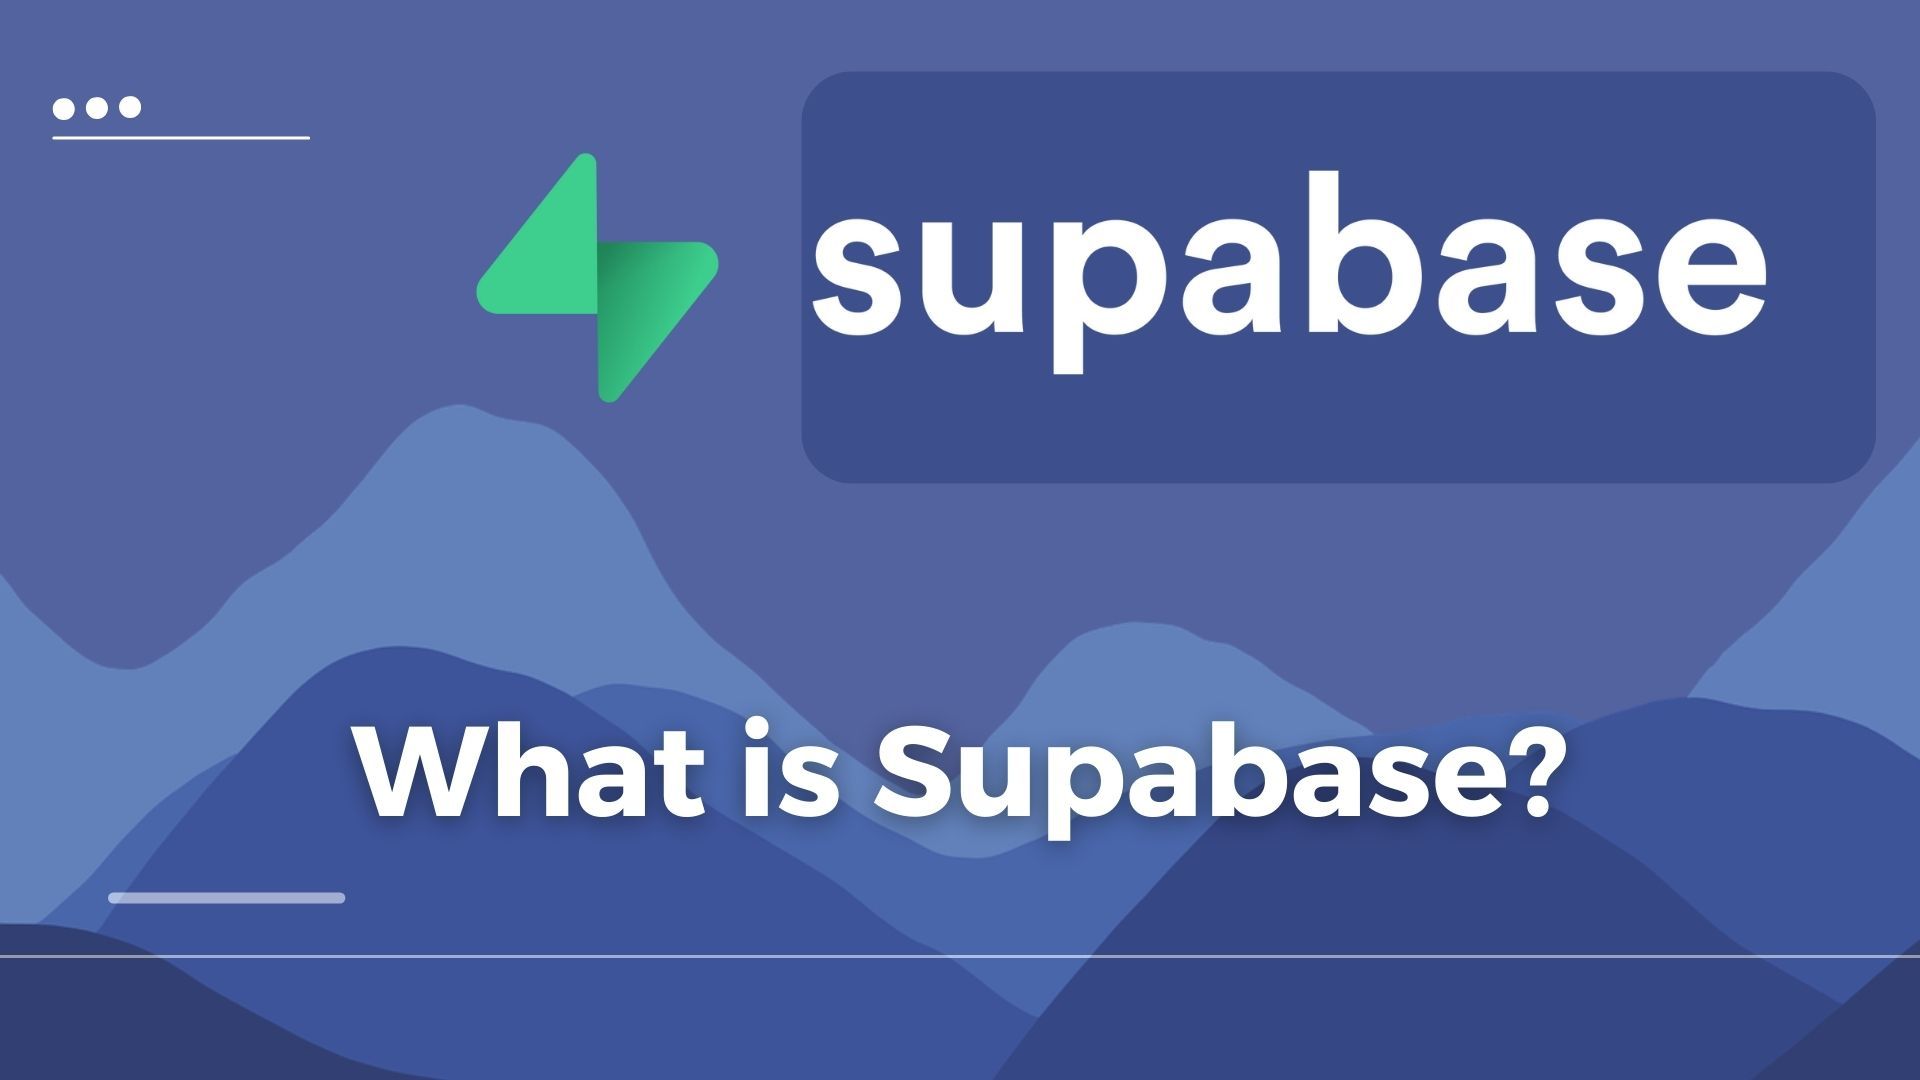 What is Supabase?